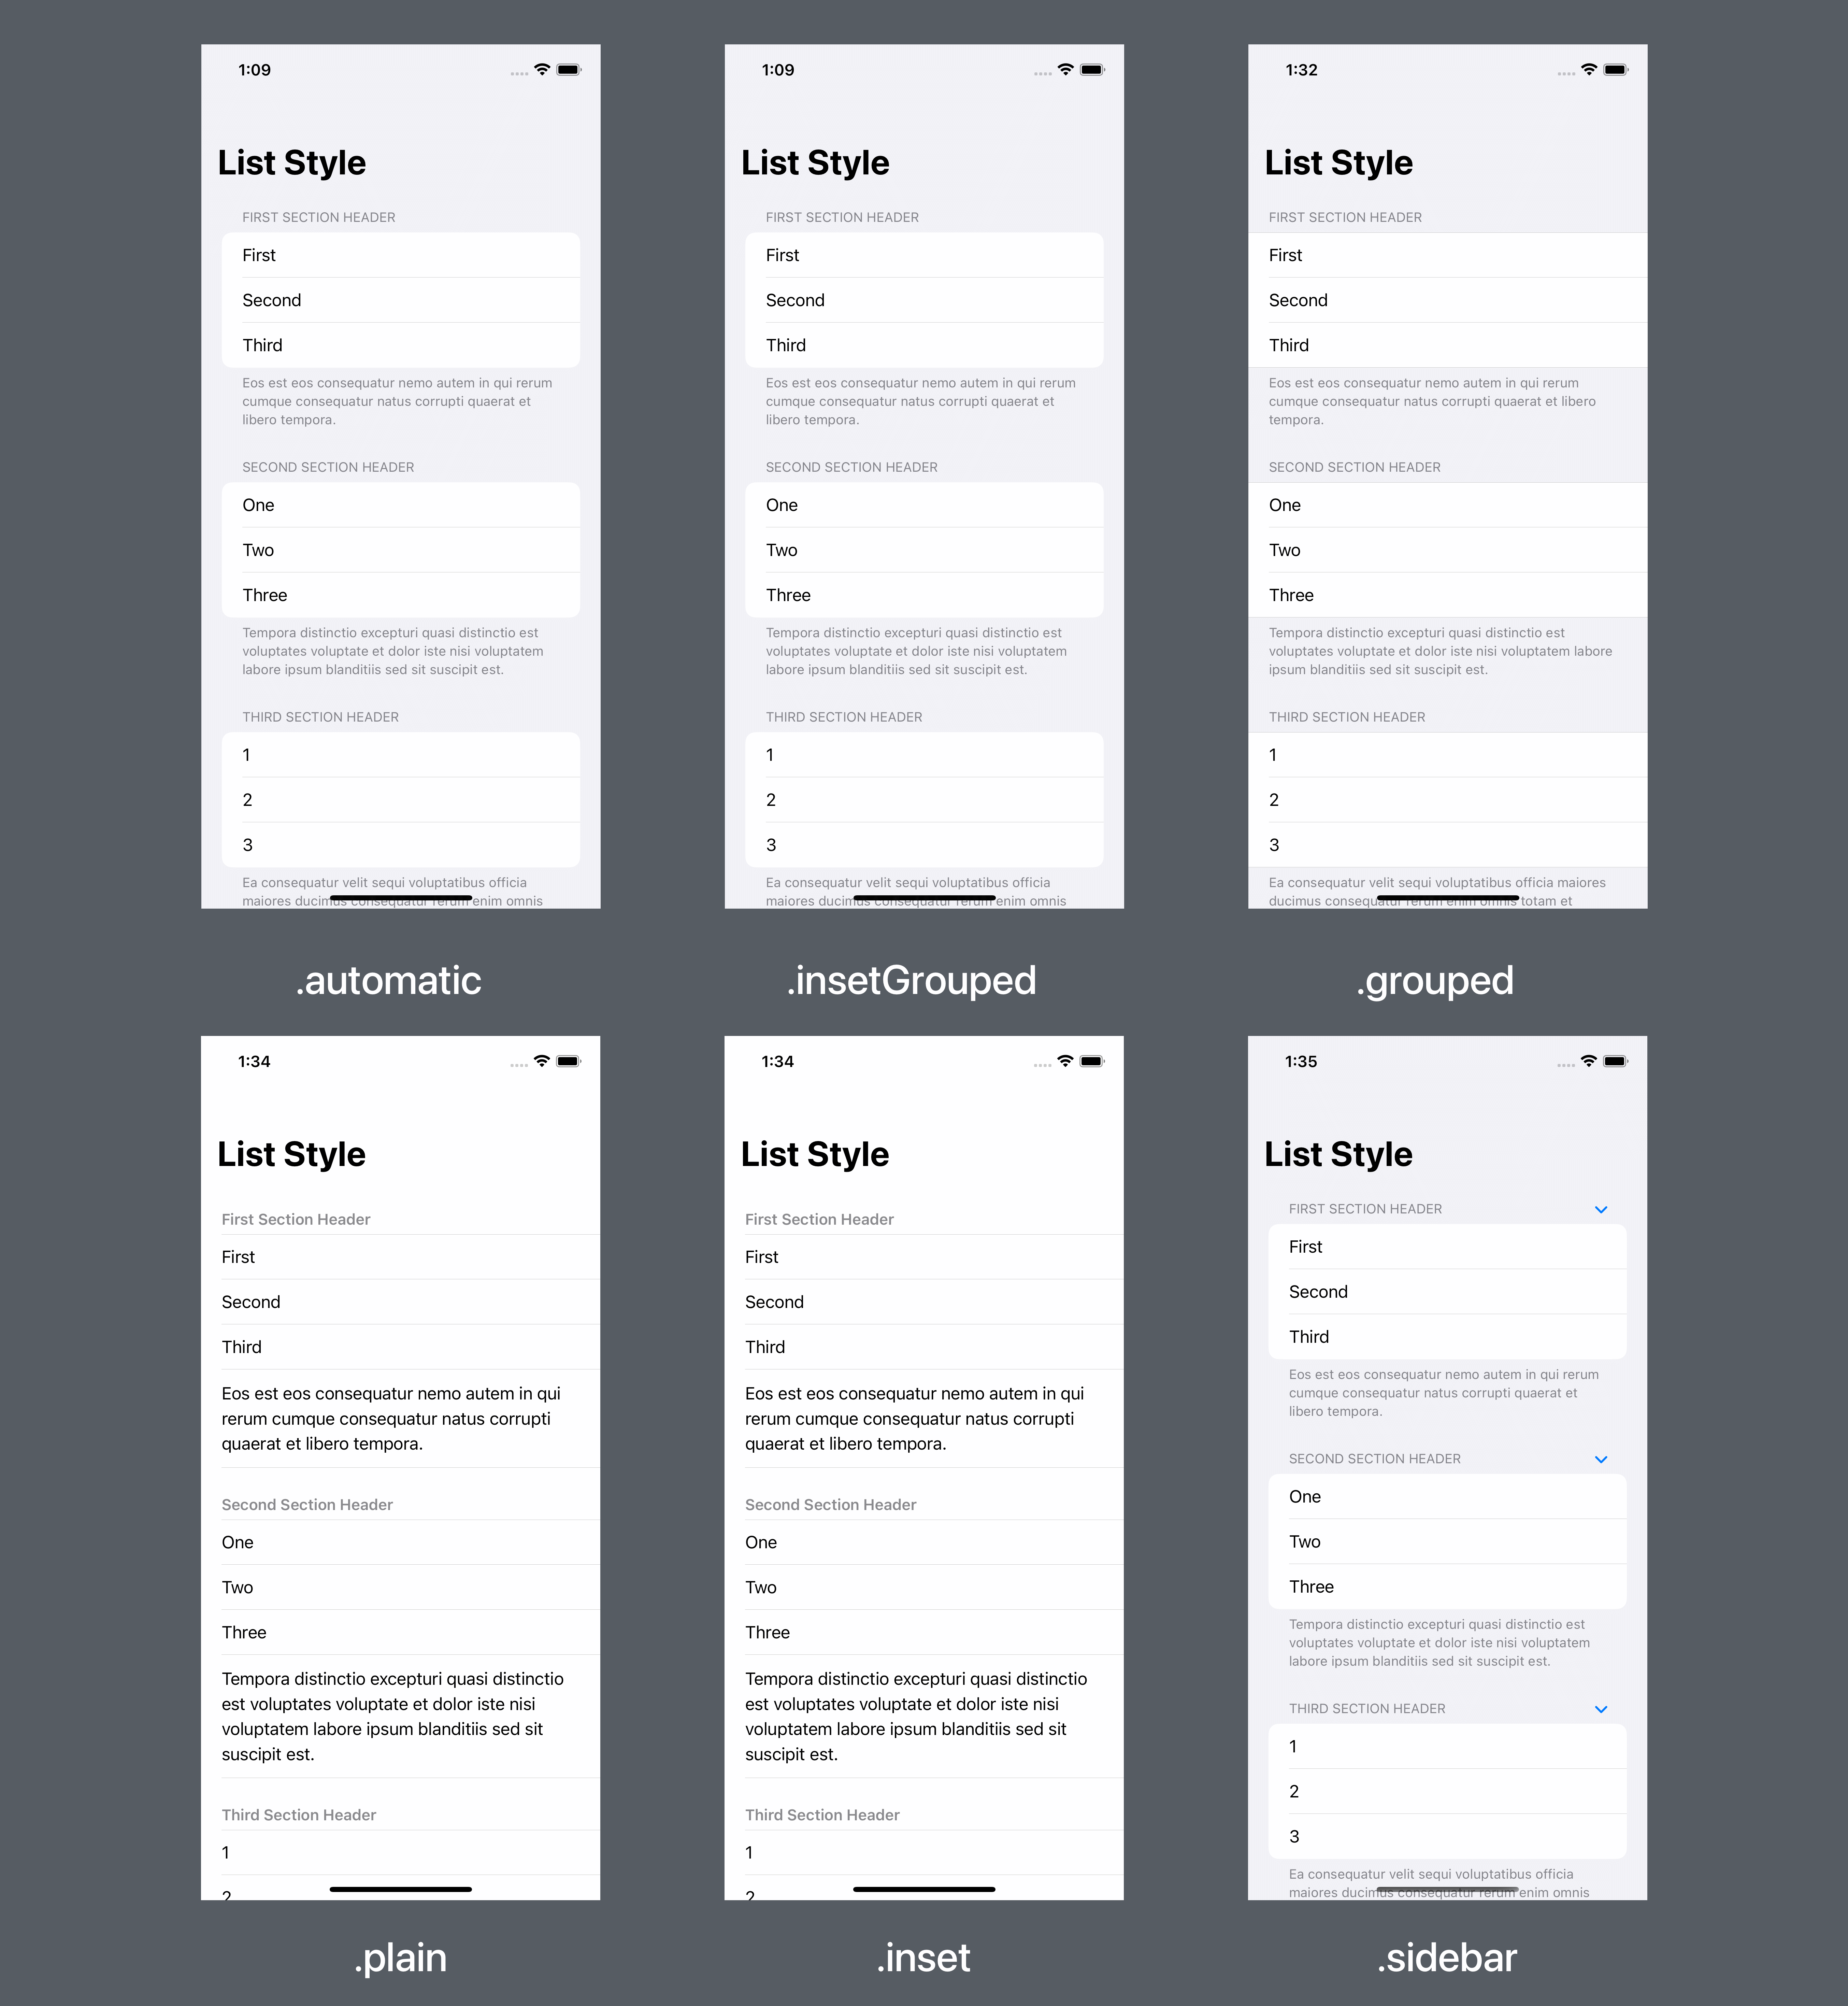 All six list styles you can use in iOS.